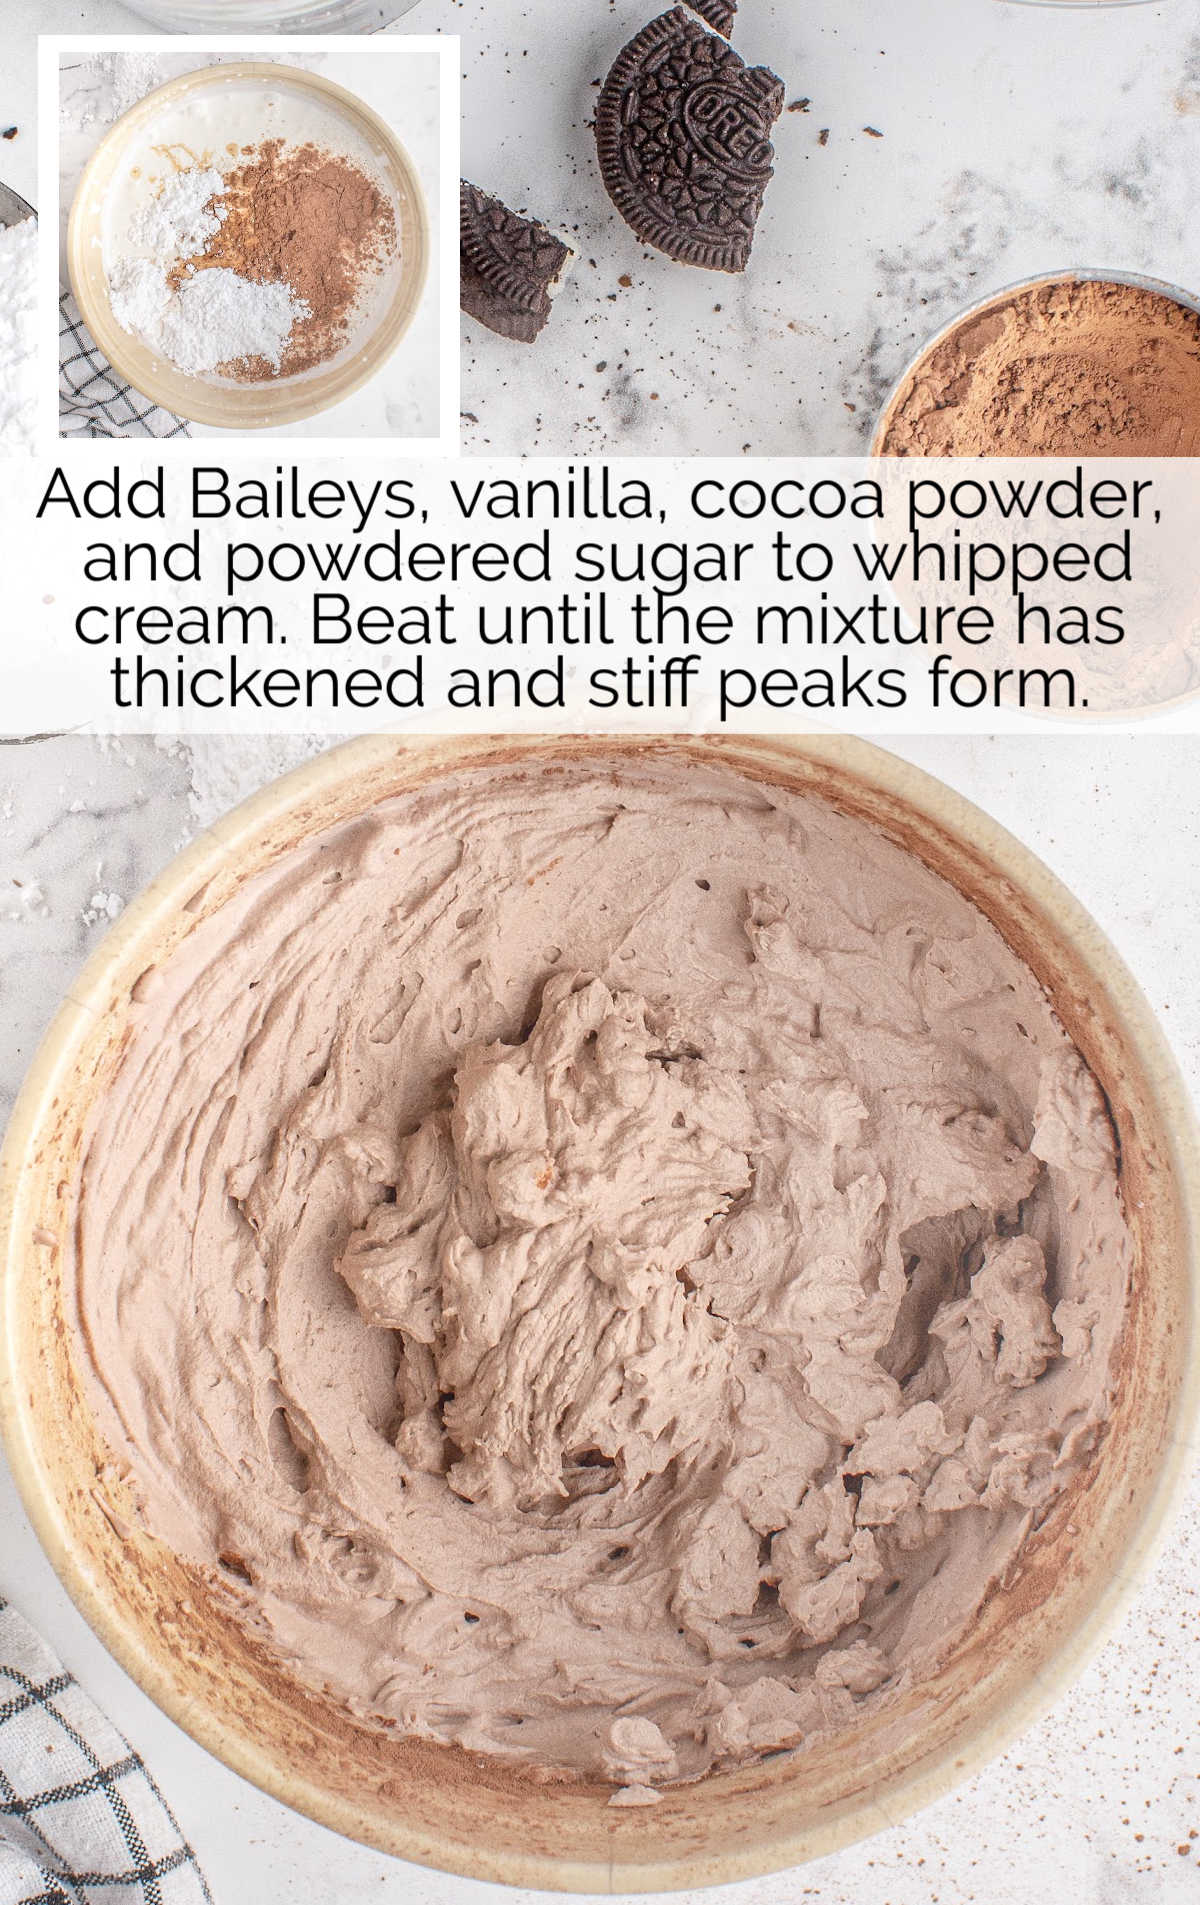 Baileys, vanilla, cocoa powder, and powdered sugar blended in a bowl